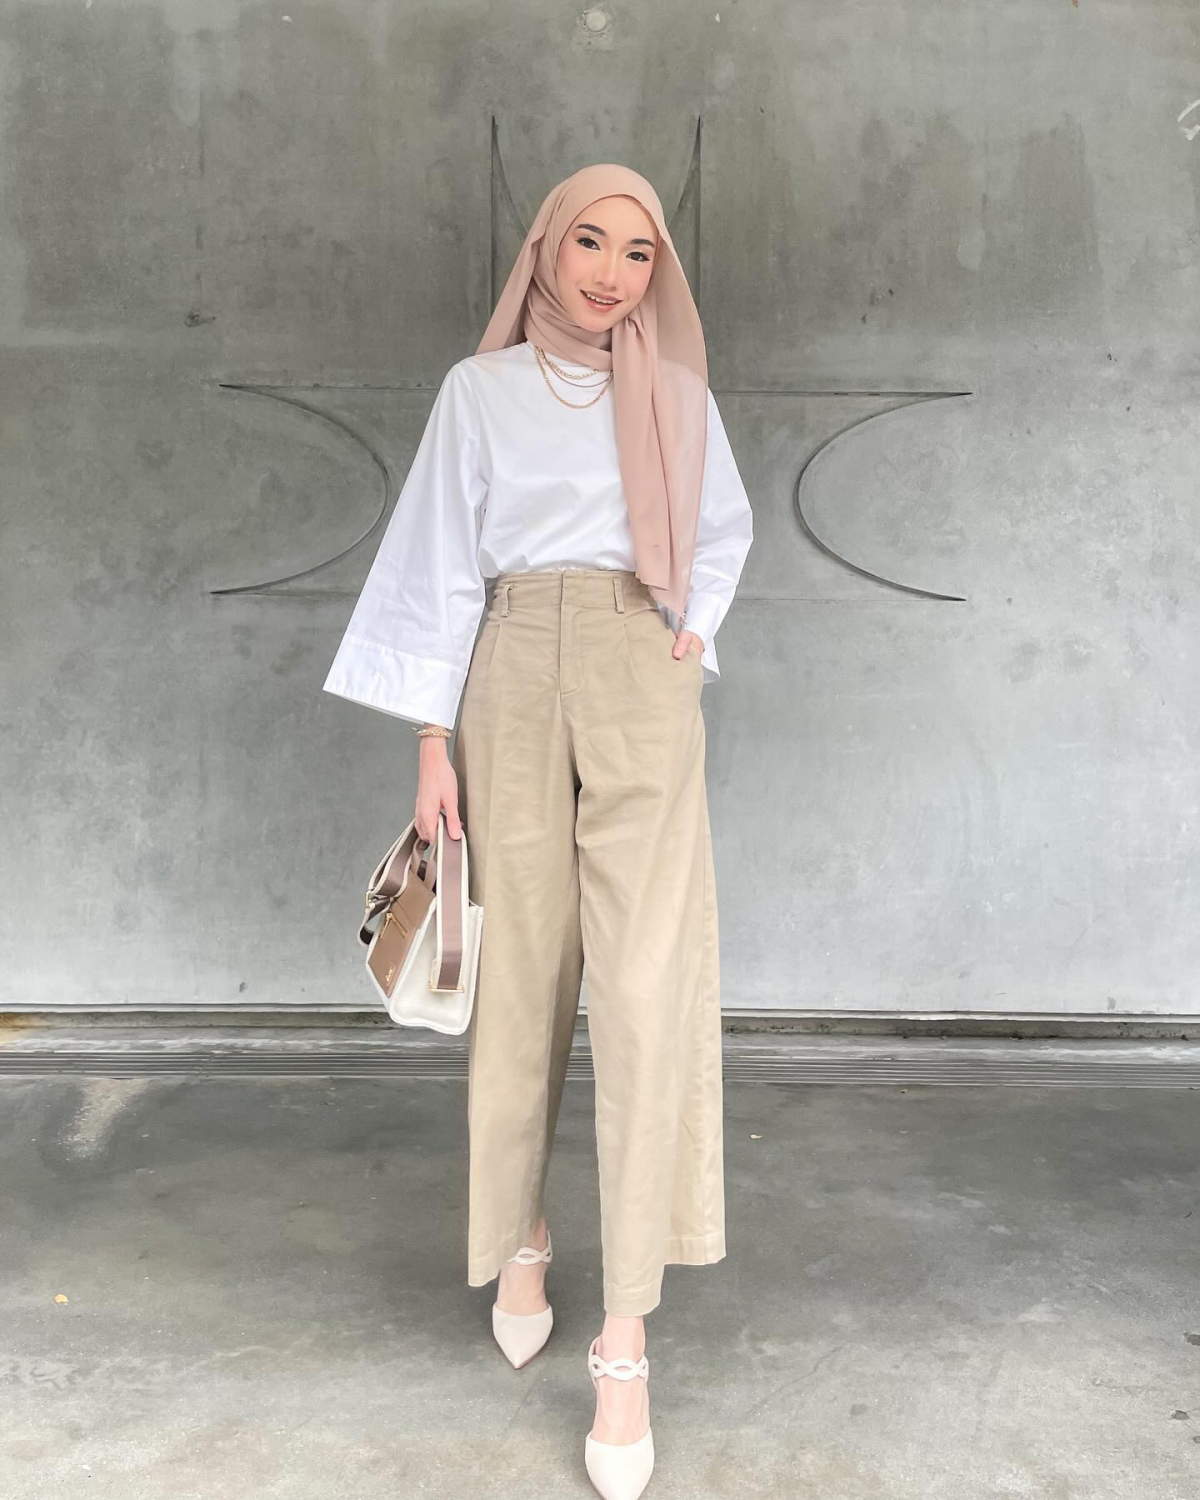 dress pants outfit with white blouse